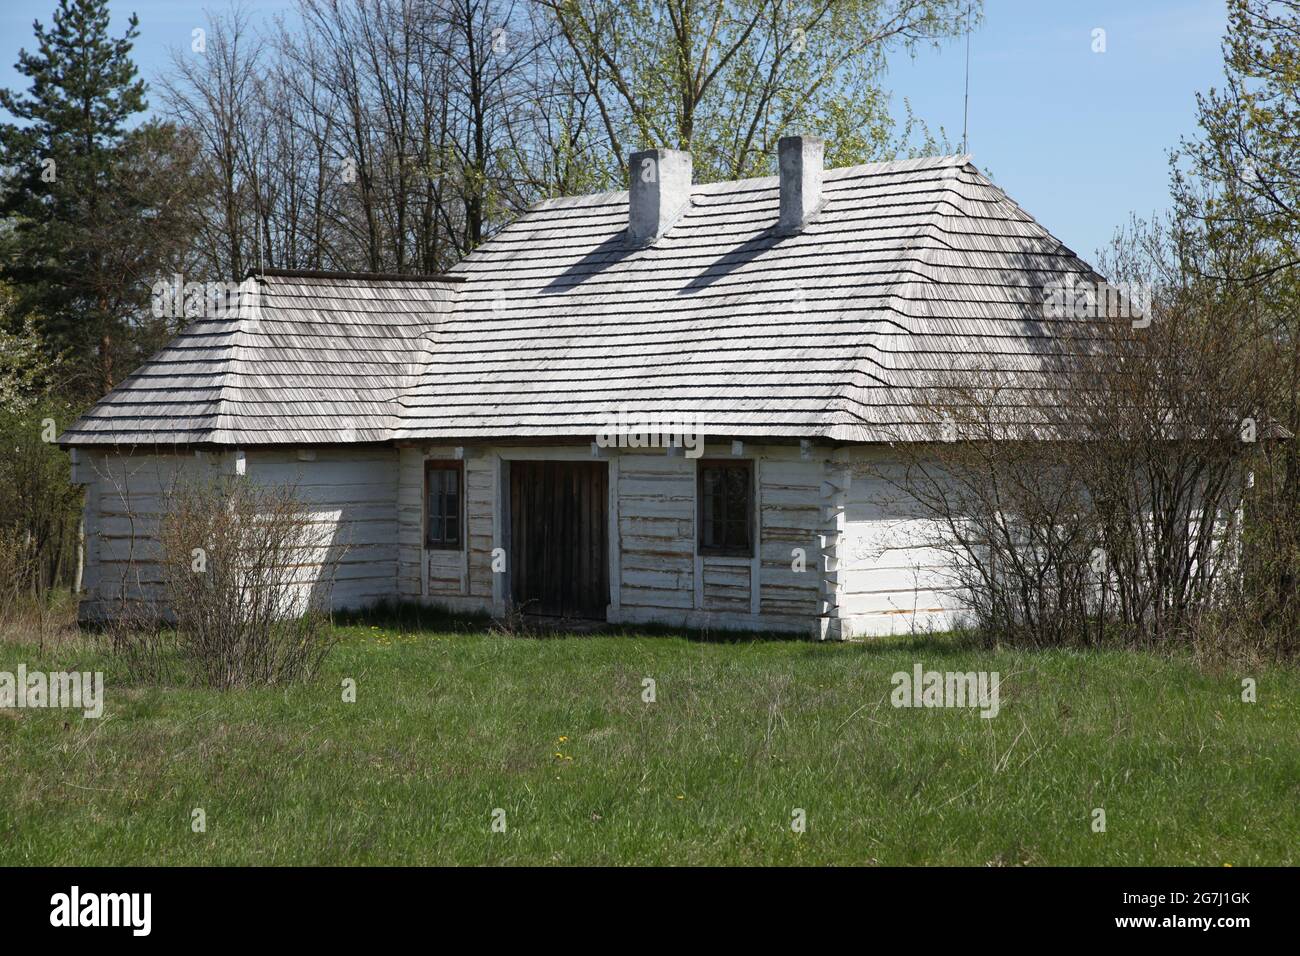 Old country cottage, open-air museum in Tokarnia, rural architecture, wooden architecture, Tokarnia, Stock Photo